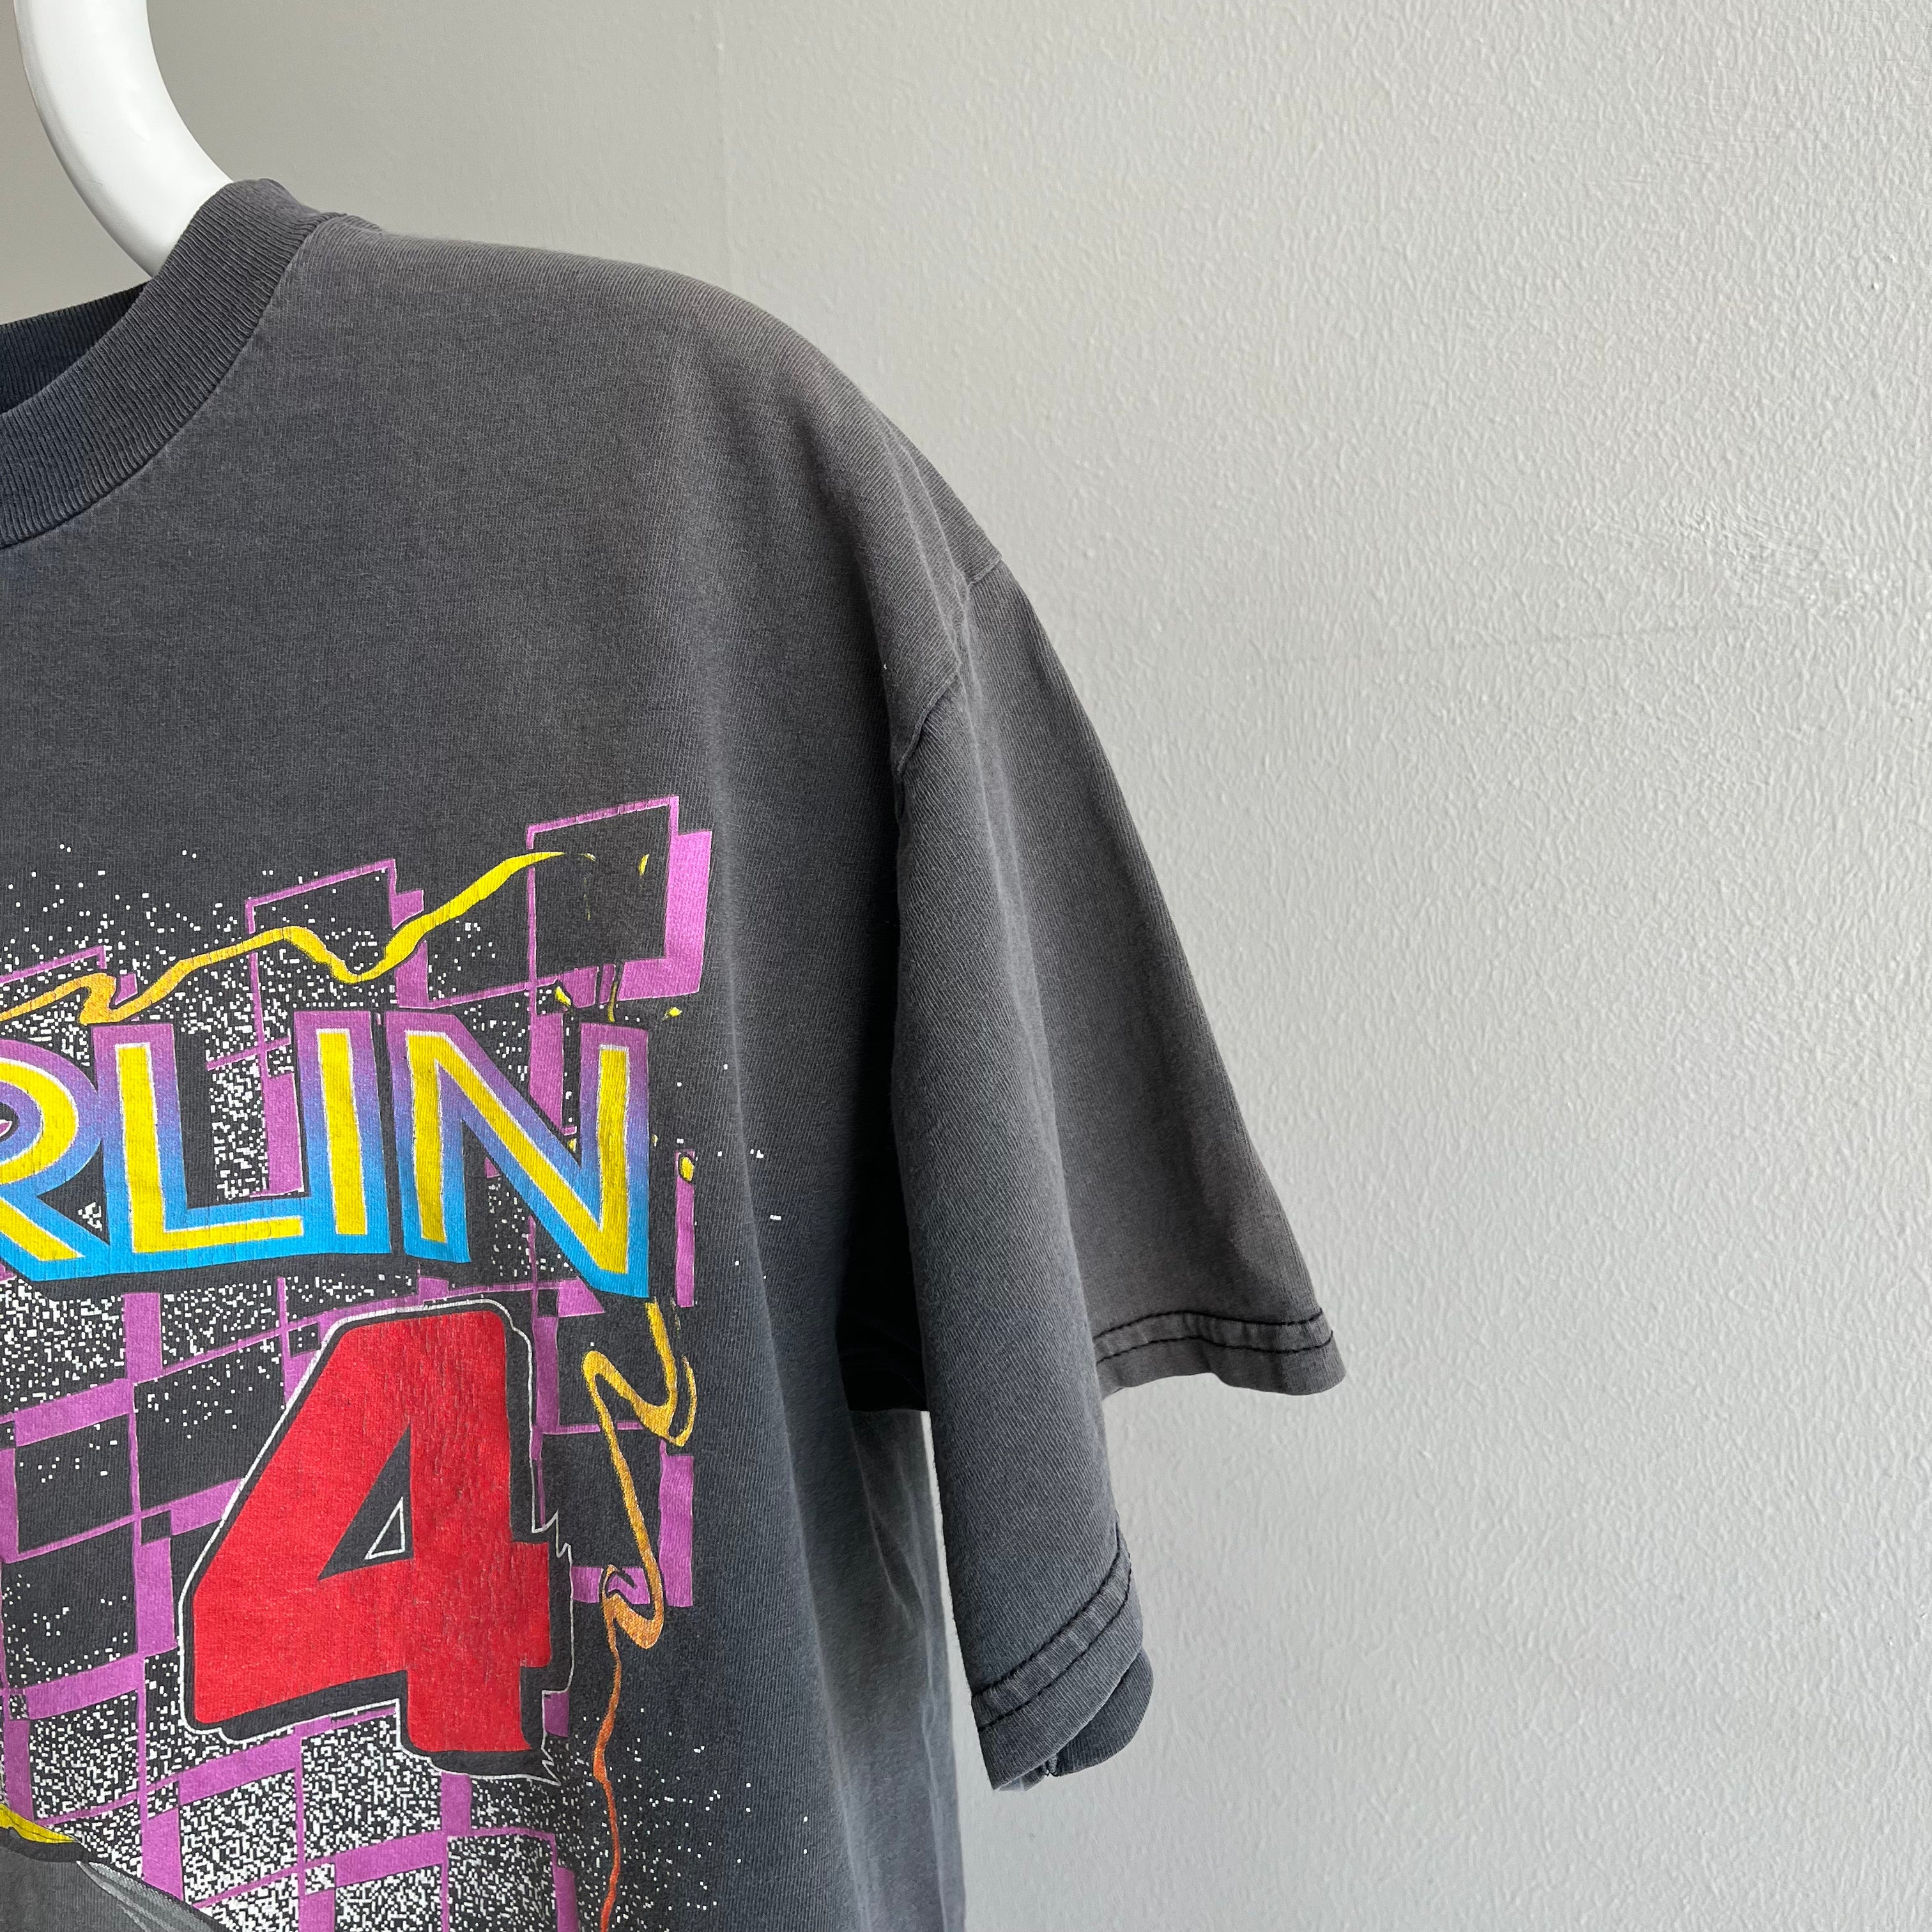 1997 NASCAR Marlin Sterling Front and Back T-Shirt